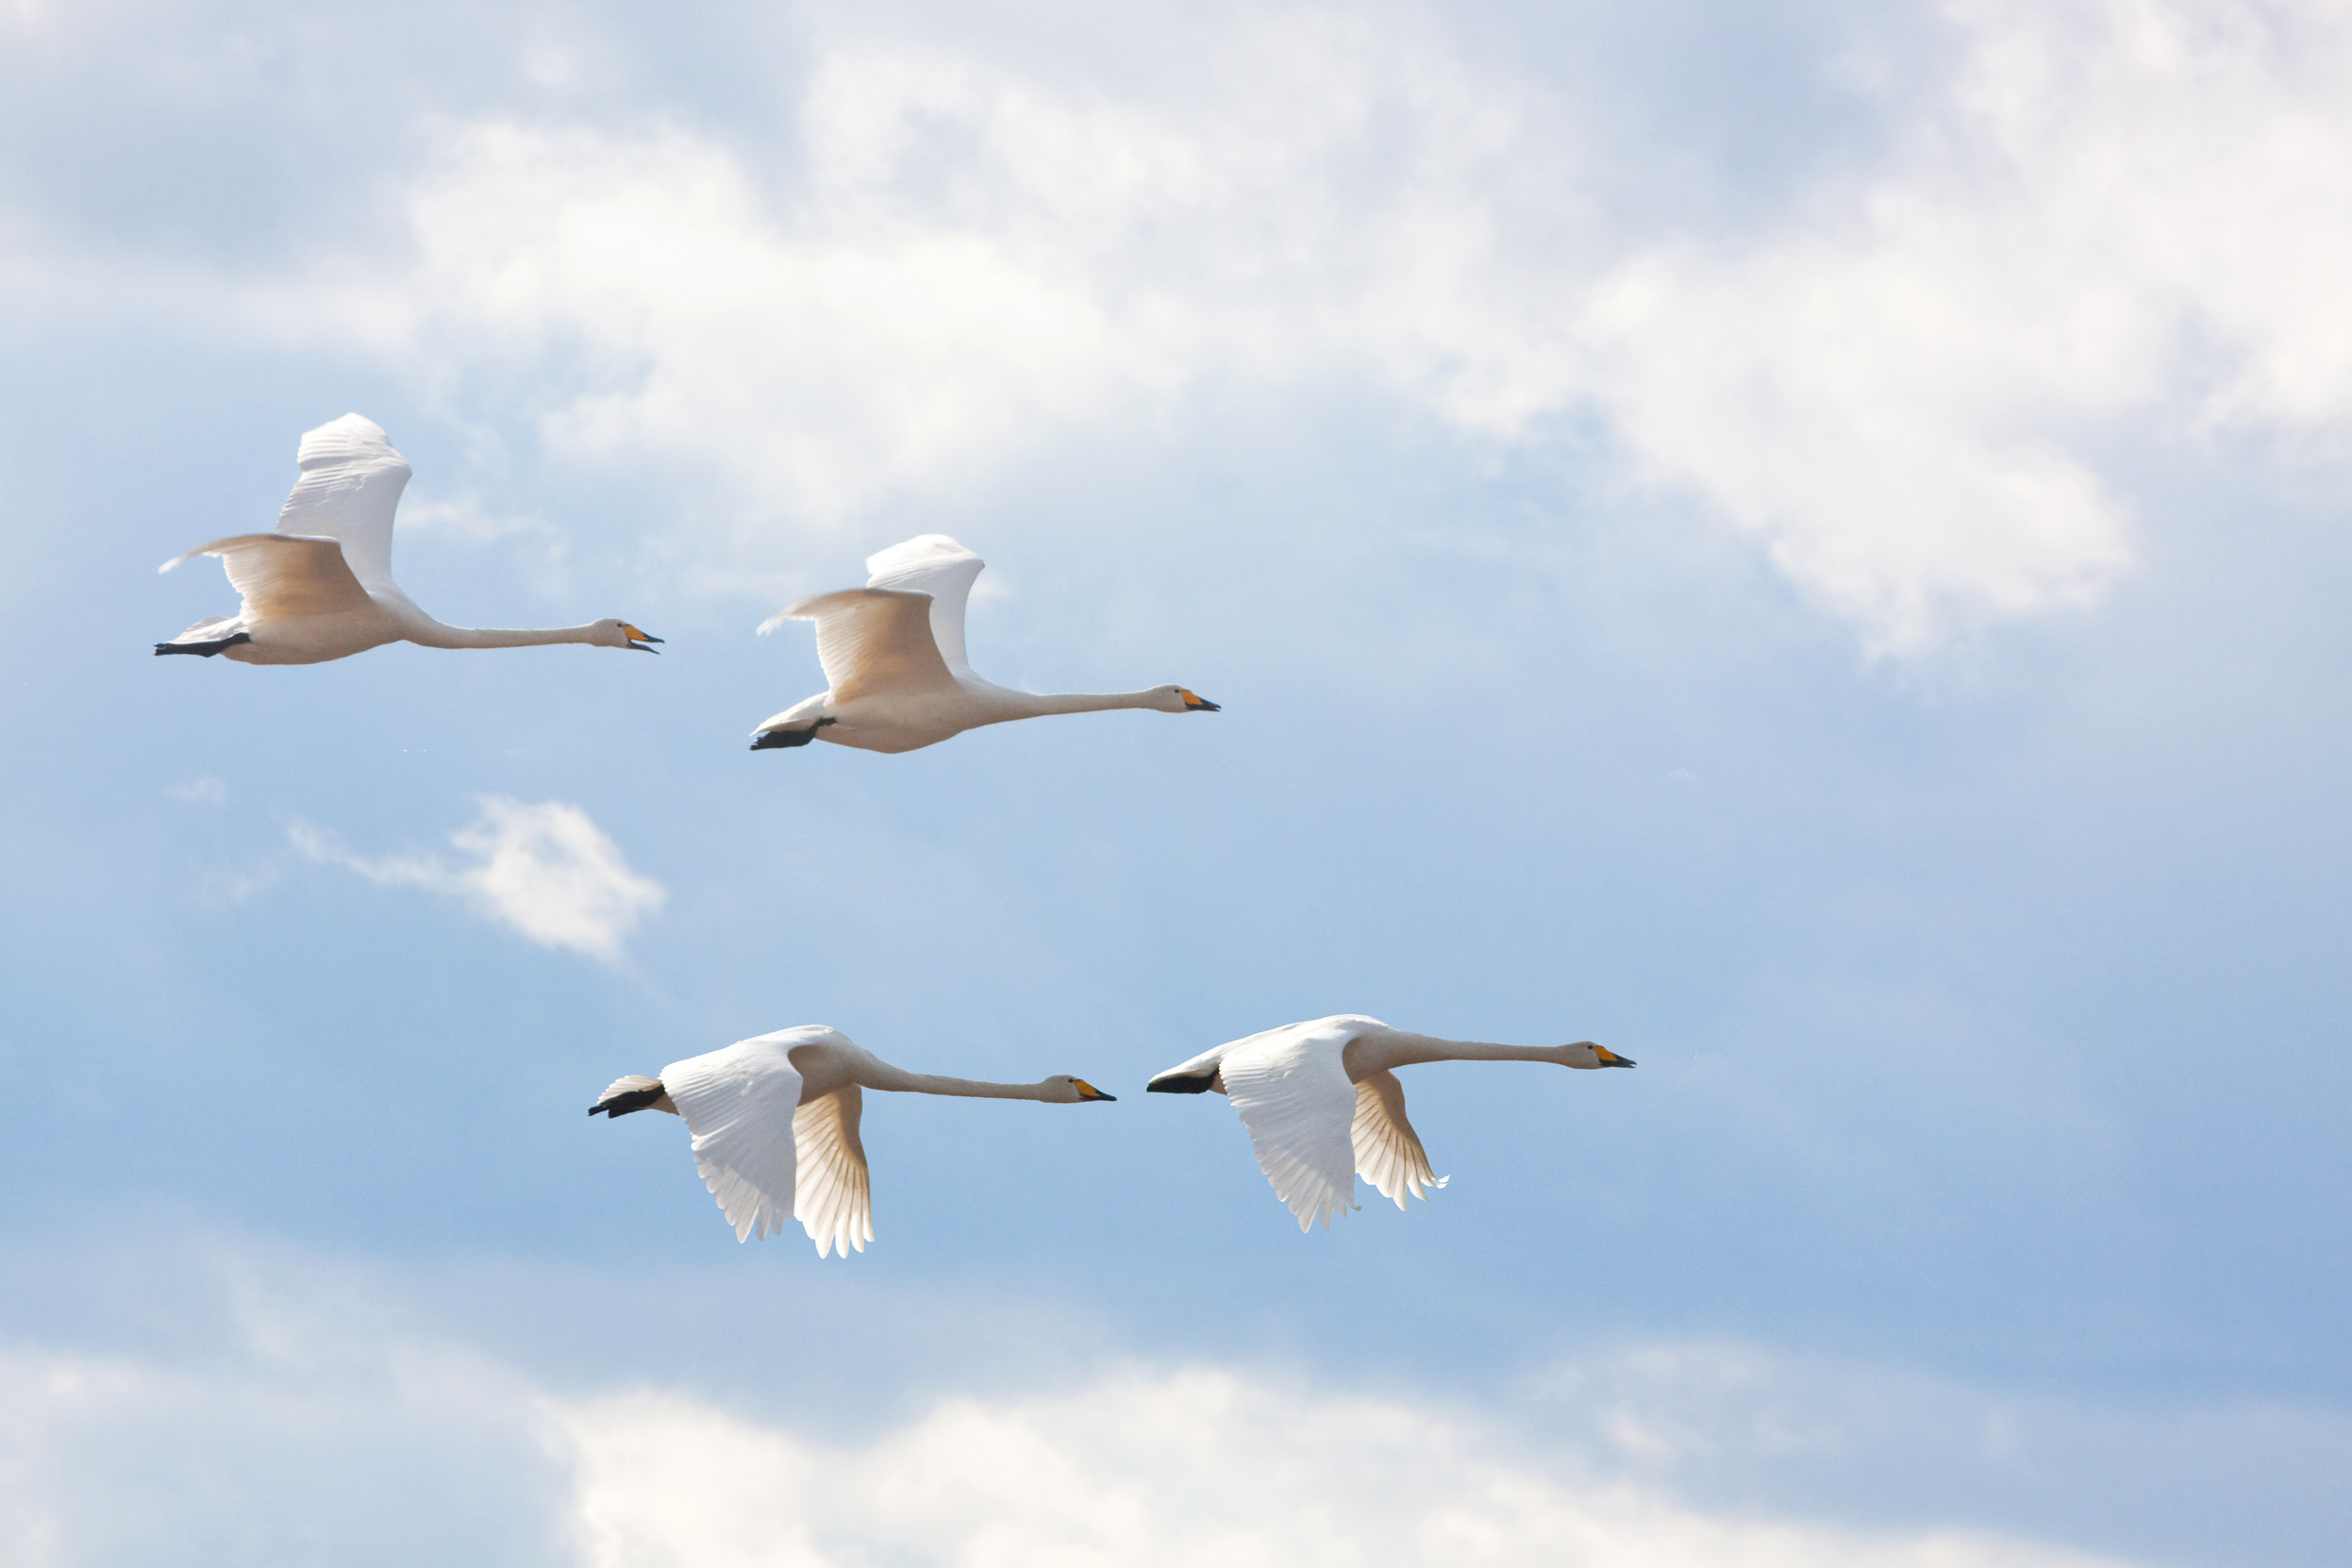 Four Whooper Swans flying in formation in a blue cloudy sky.